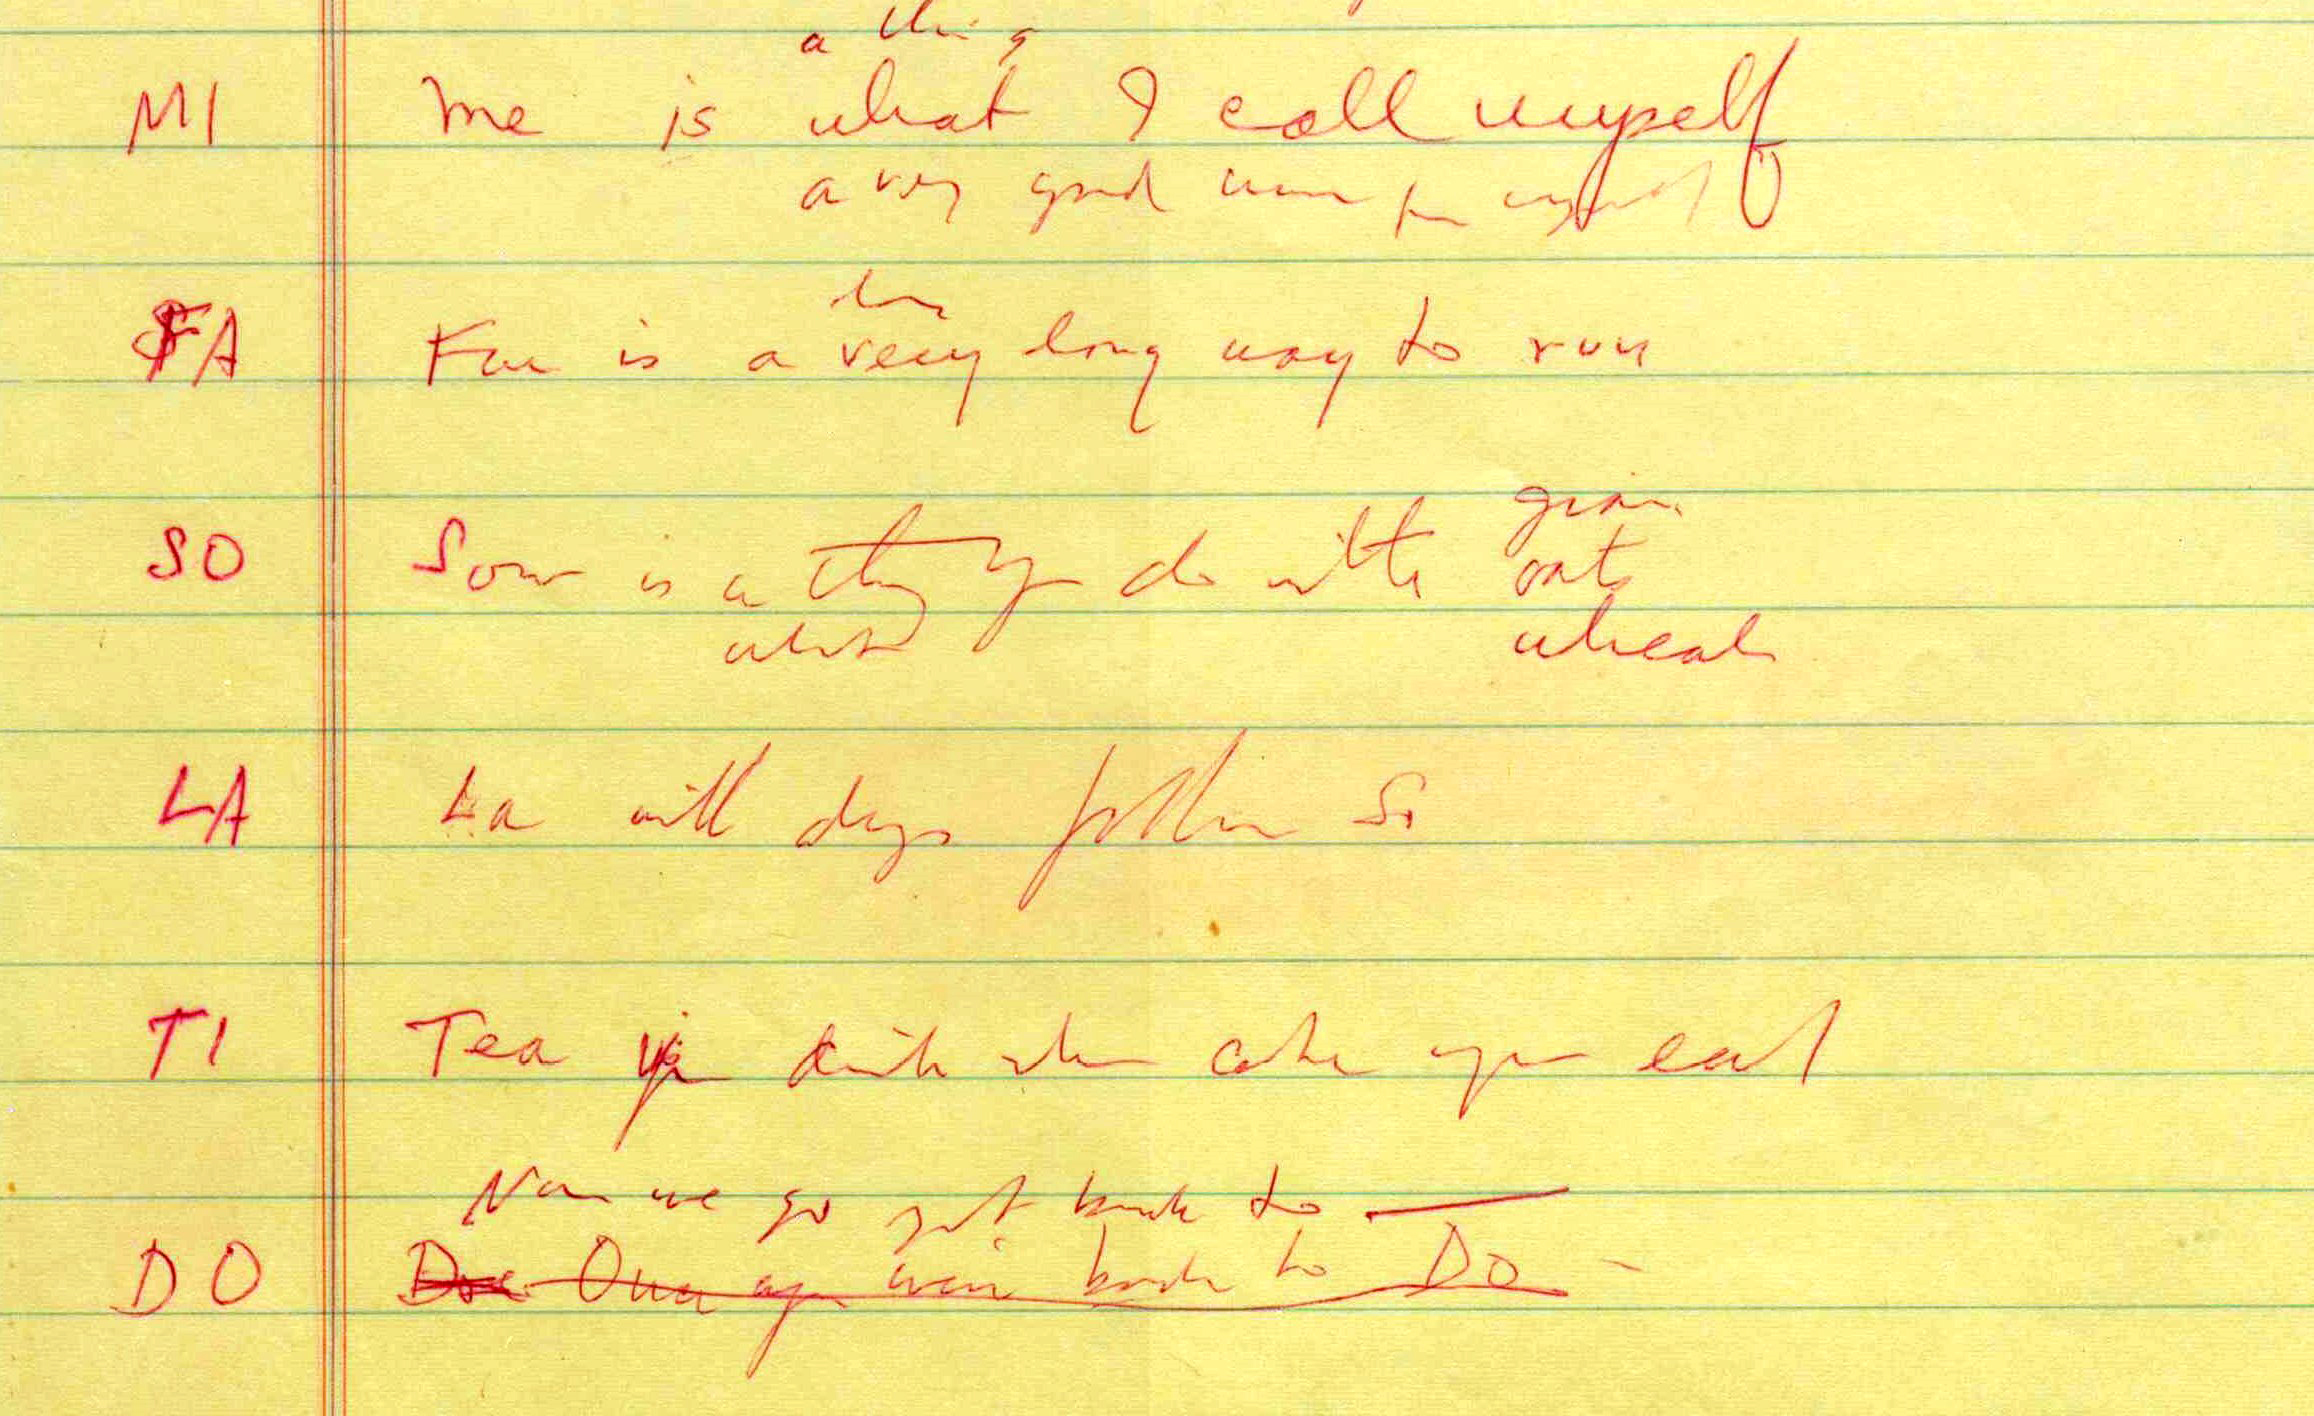 PHOTO: One of Oscar Hammerstein's handwritten notes as he was writing the song, "Do Re Mi," for "The Sound of Music."